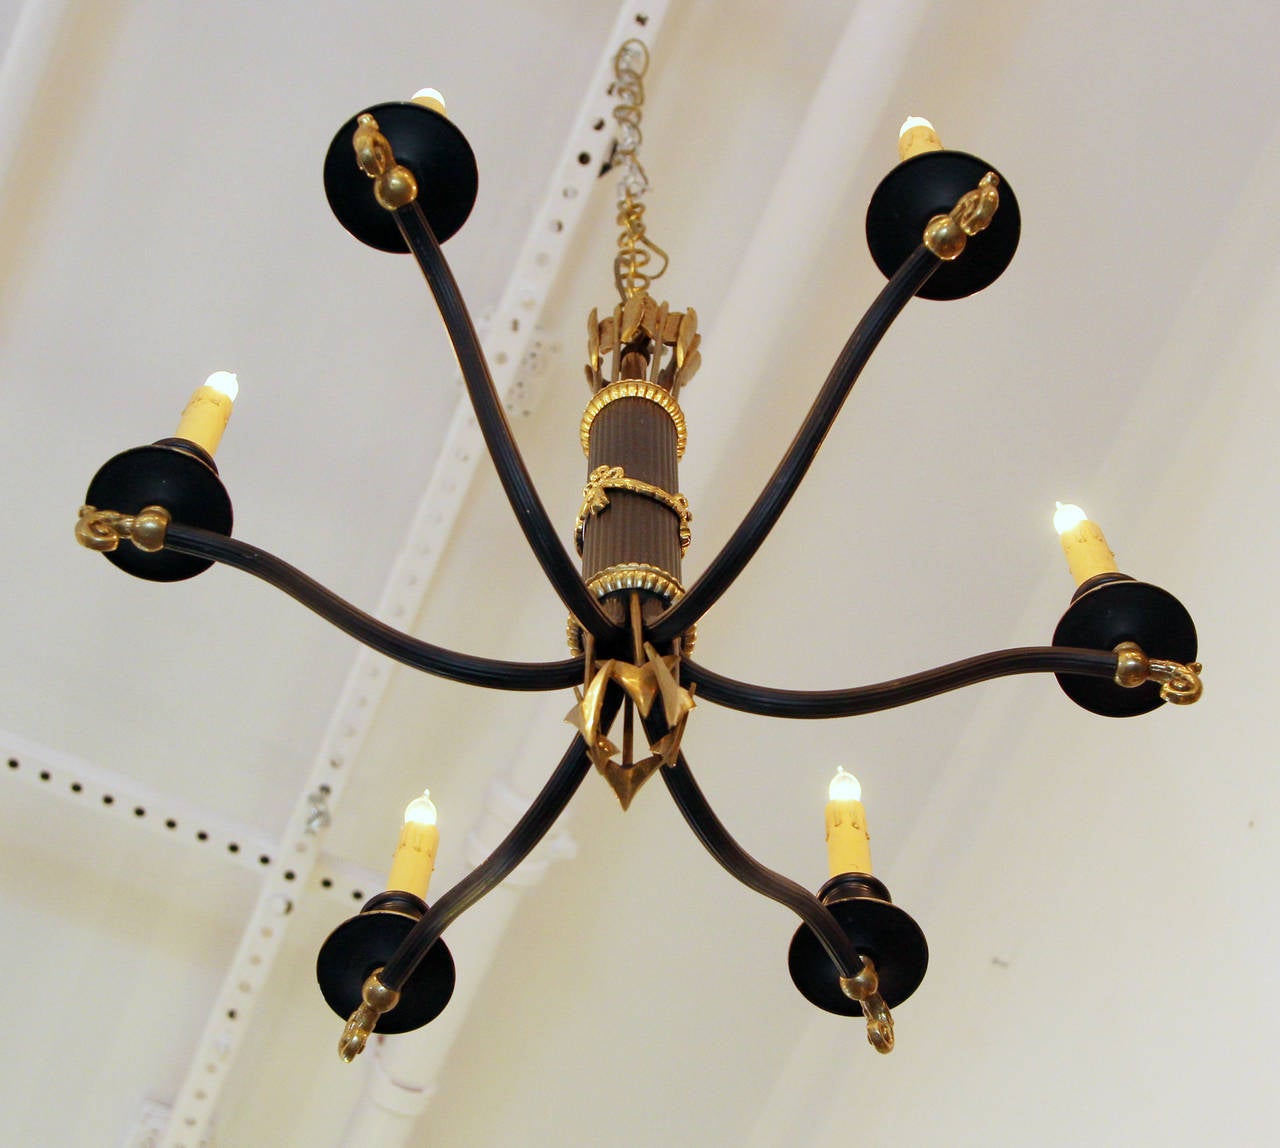 Mid-20th Century 1930s French Regency Gold and Black Six-Light Chandelier with Swags and Spears